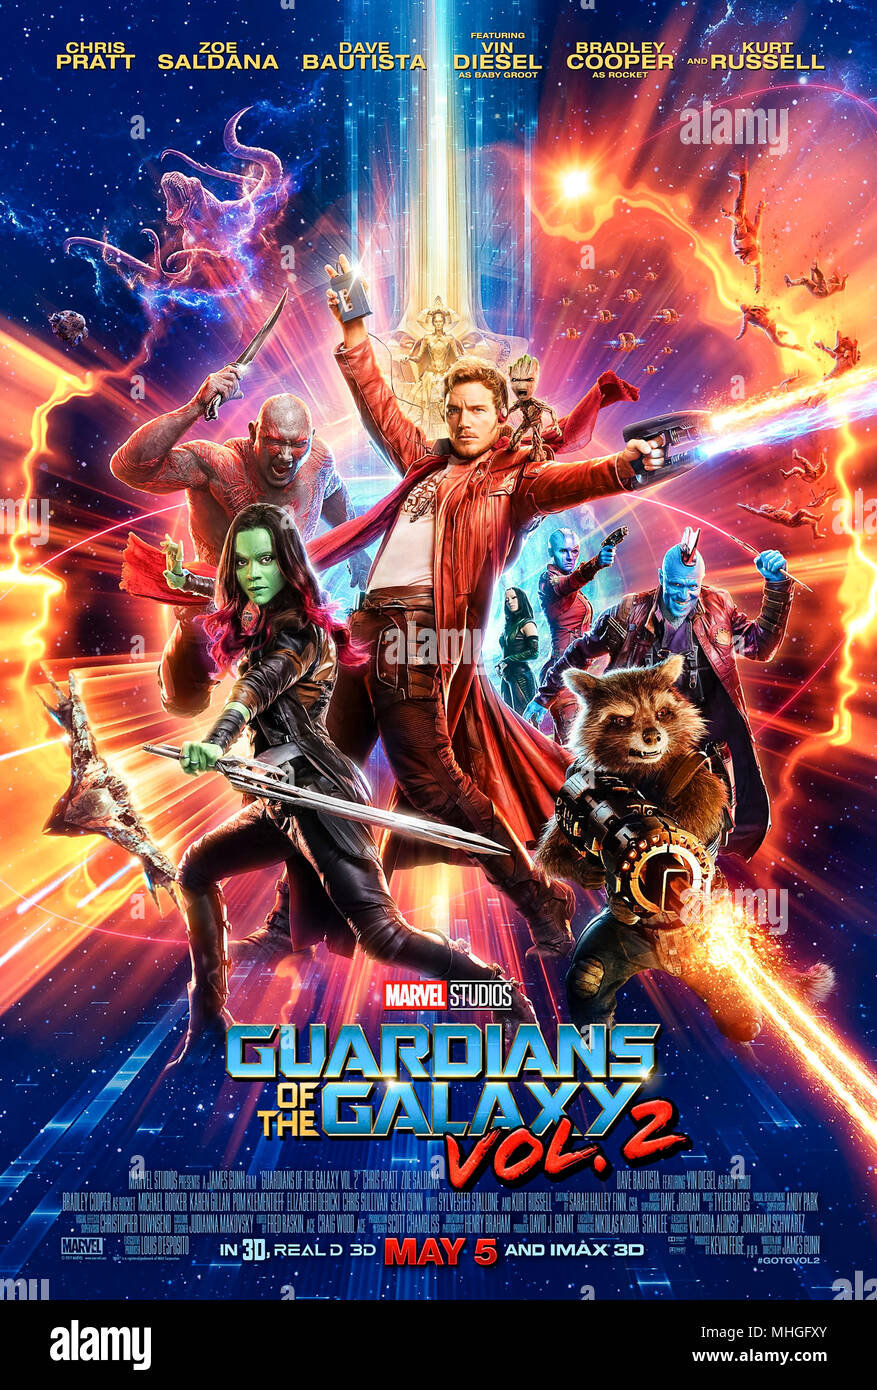 Guardians of the Galaxy: Vol. 2 (2017) directed by James Gunn and starring Chris Pratt, Vin Diesel, Bradley Cooper, Zoe Saldana and Dave Bautista. The heroes return and help Star Lord with some parental issues. Stock Photo